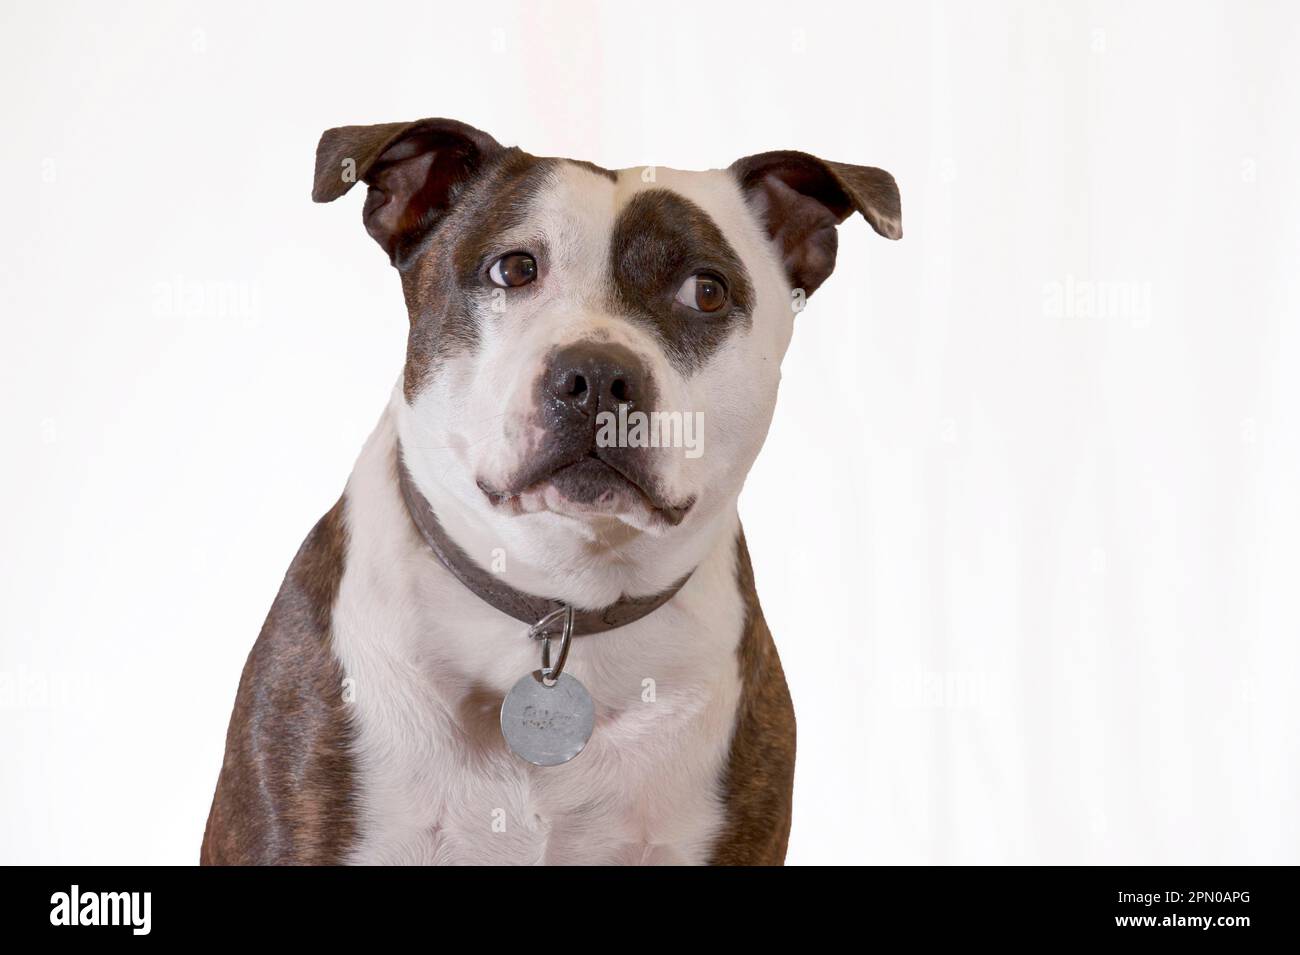 Domestic dog, Staffordshire Bull Terrier, adult male, close-up of head, with collar and identification tag Stock Photo